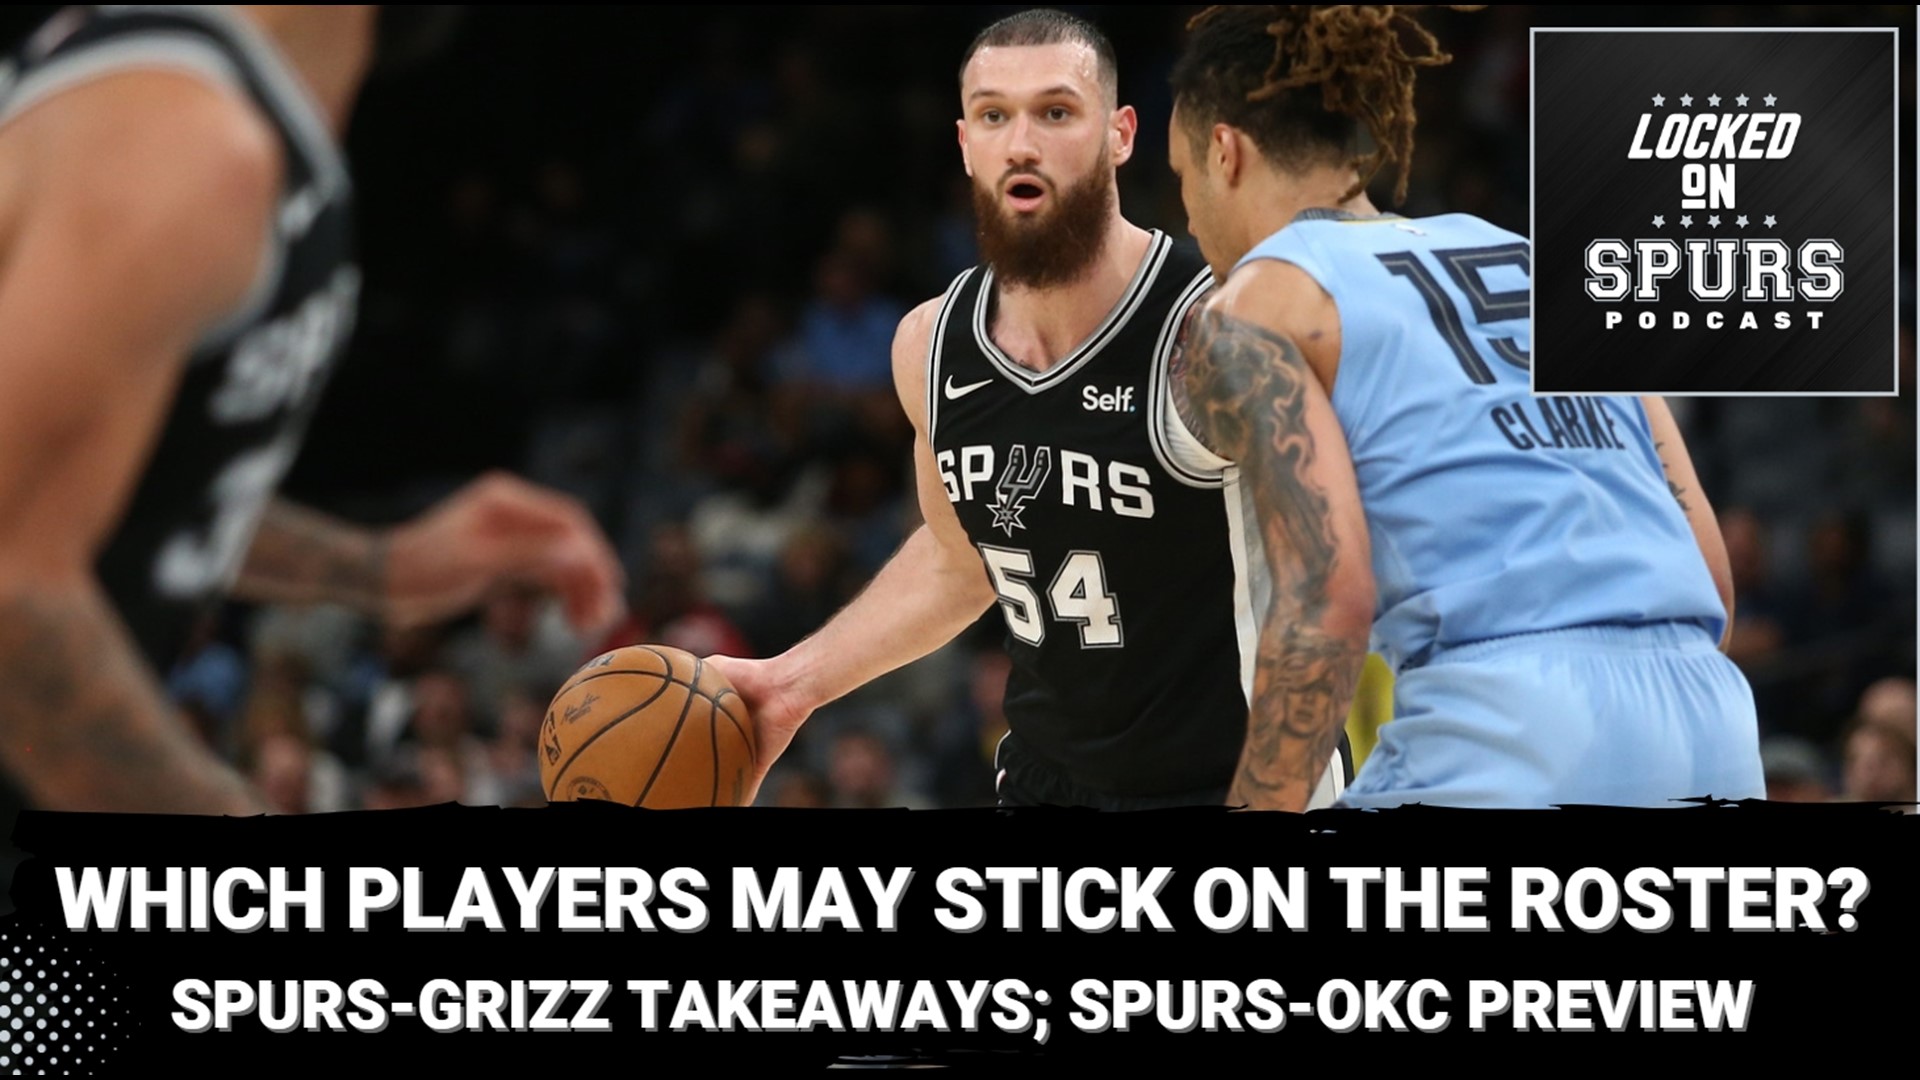 Also, a preview of tonight's Spurs-Thunder game.